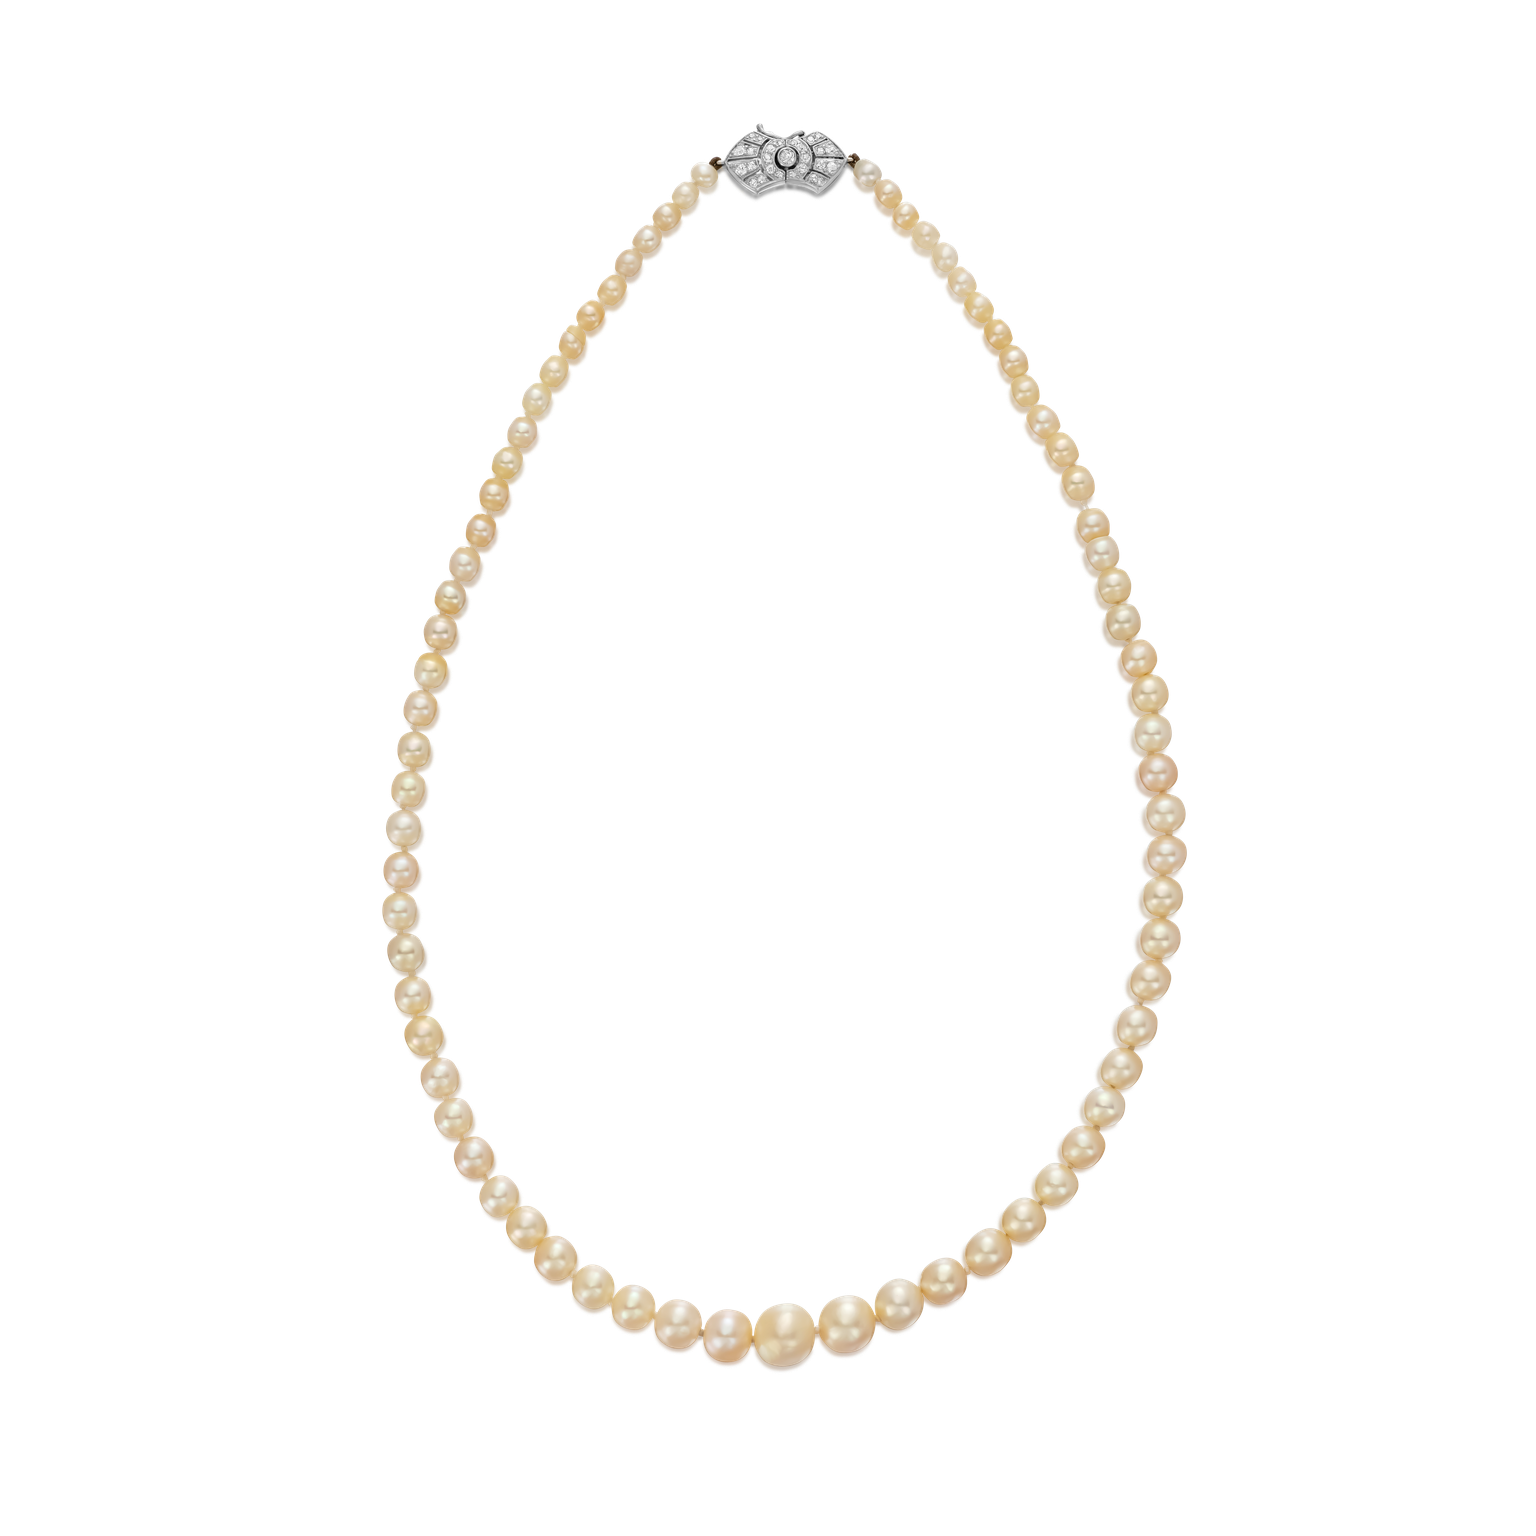 Graduated Single Row Natural Saltwater Pearl Necklace